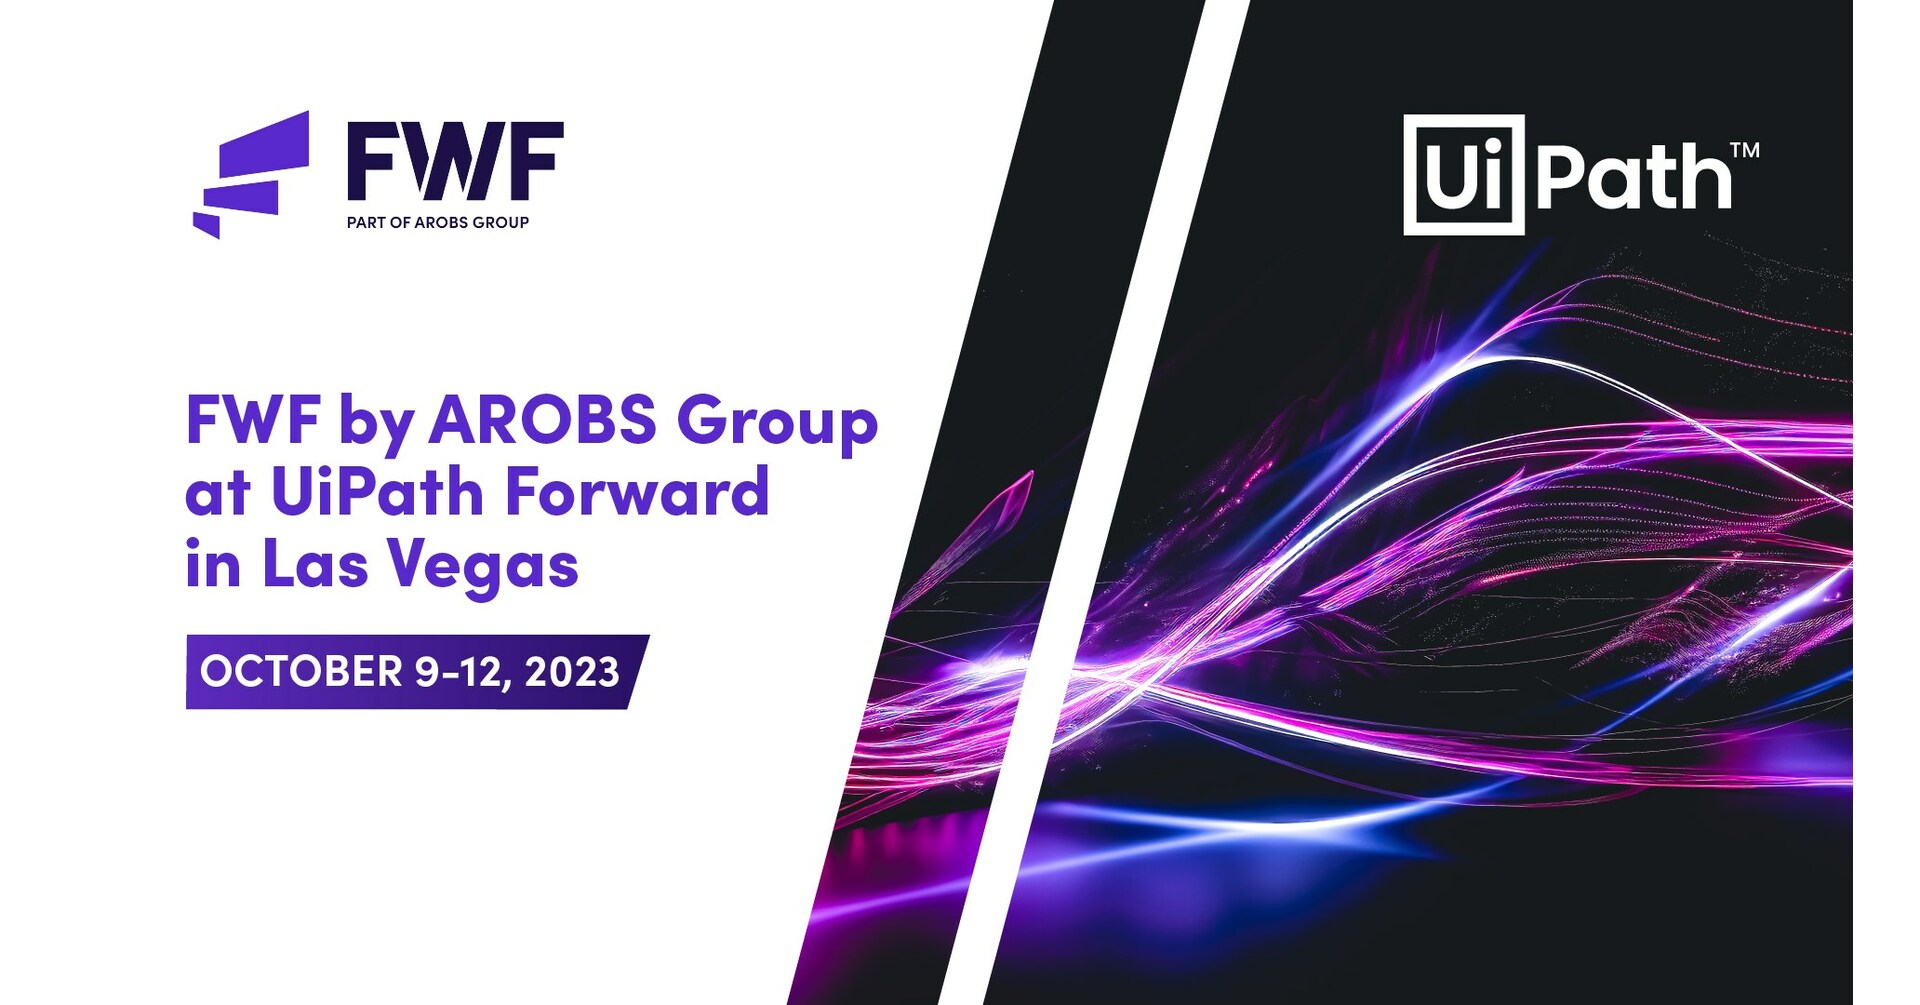 FWF by AROBS Group set to showcase Intelligent Automation Excellence at